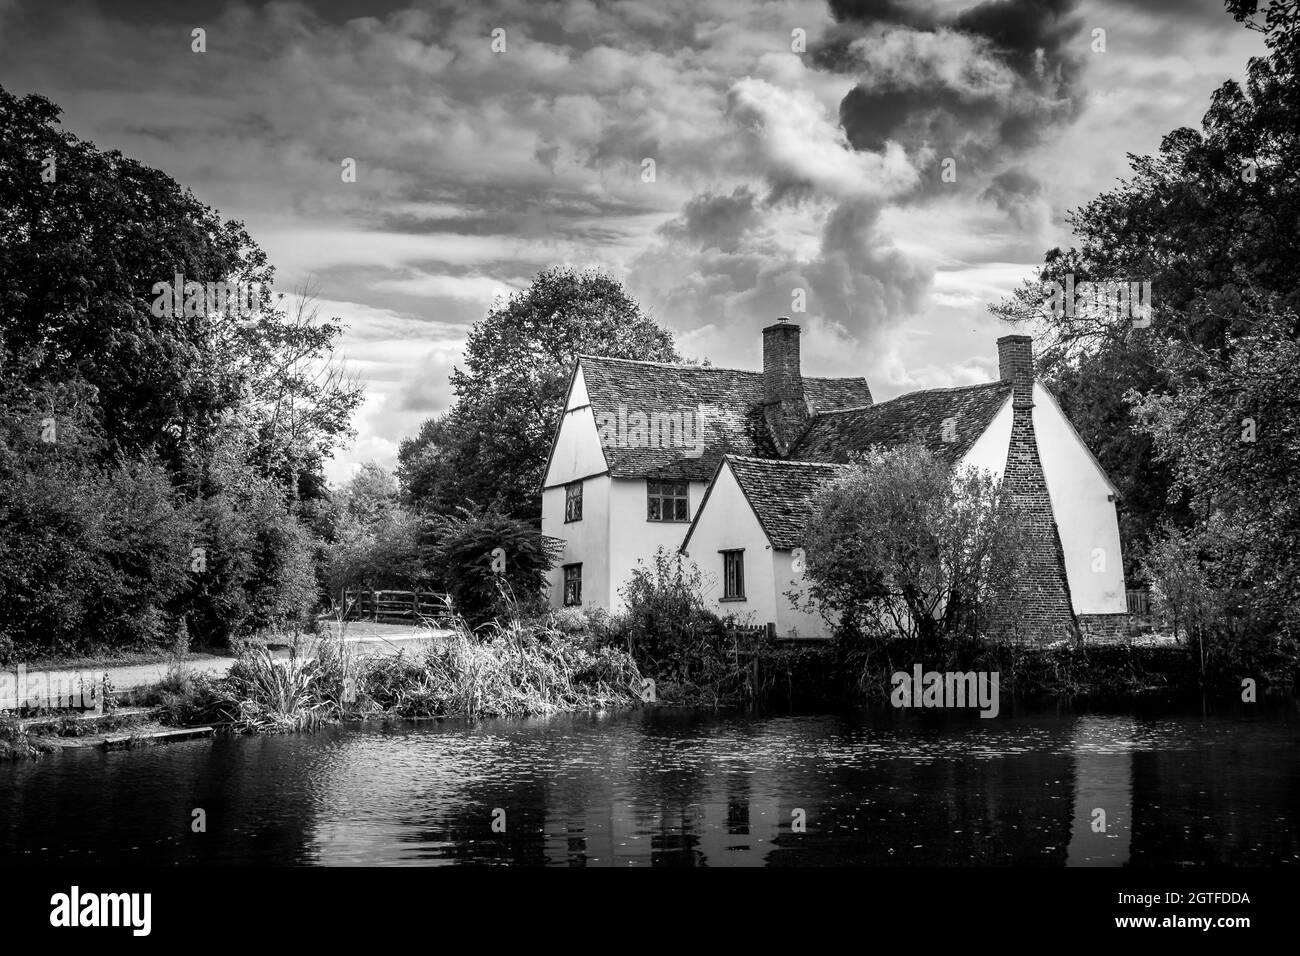 Black and white image of Willy Lotts cottage at Flatford Mill Suffolk UK made famous by John Constable. Dramatic clouds and still water. No people. Stock Photo